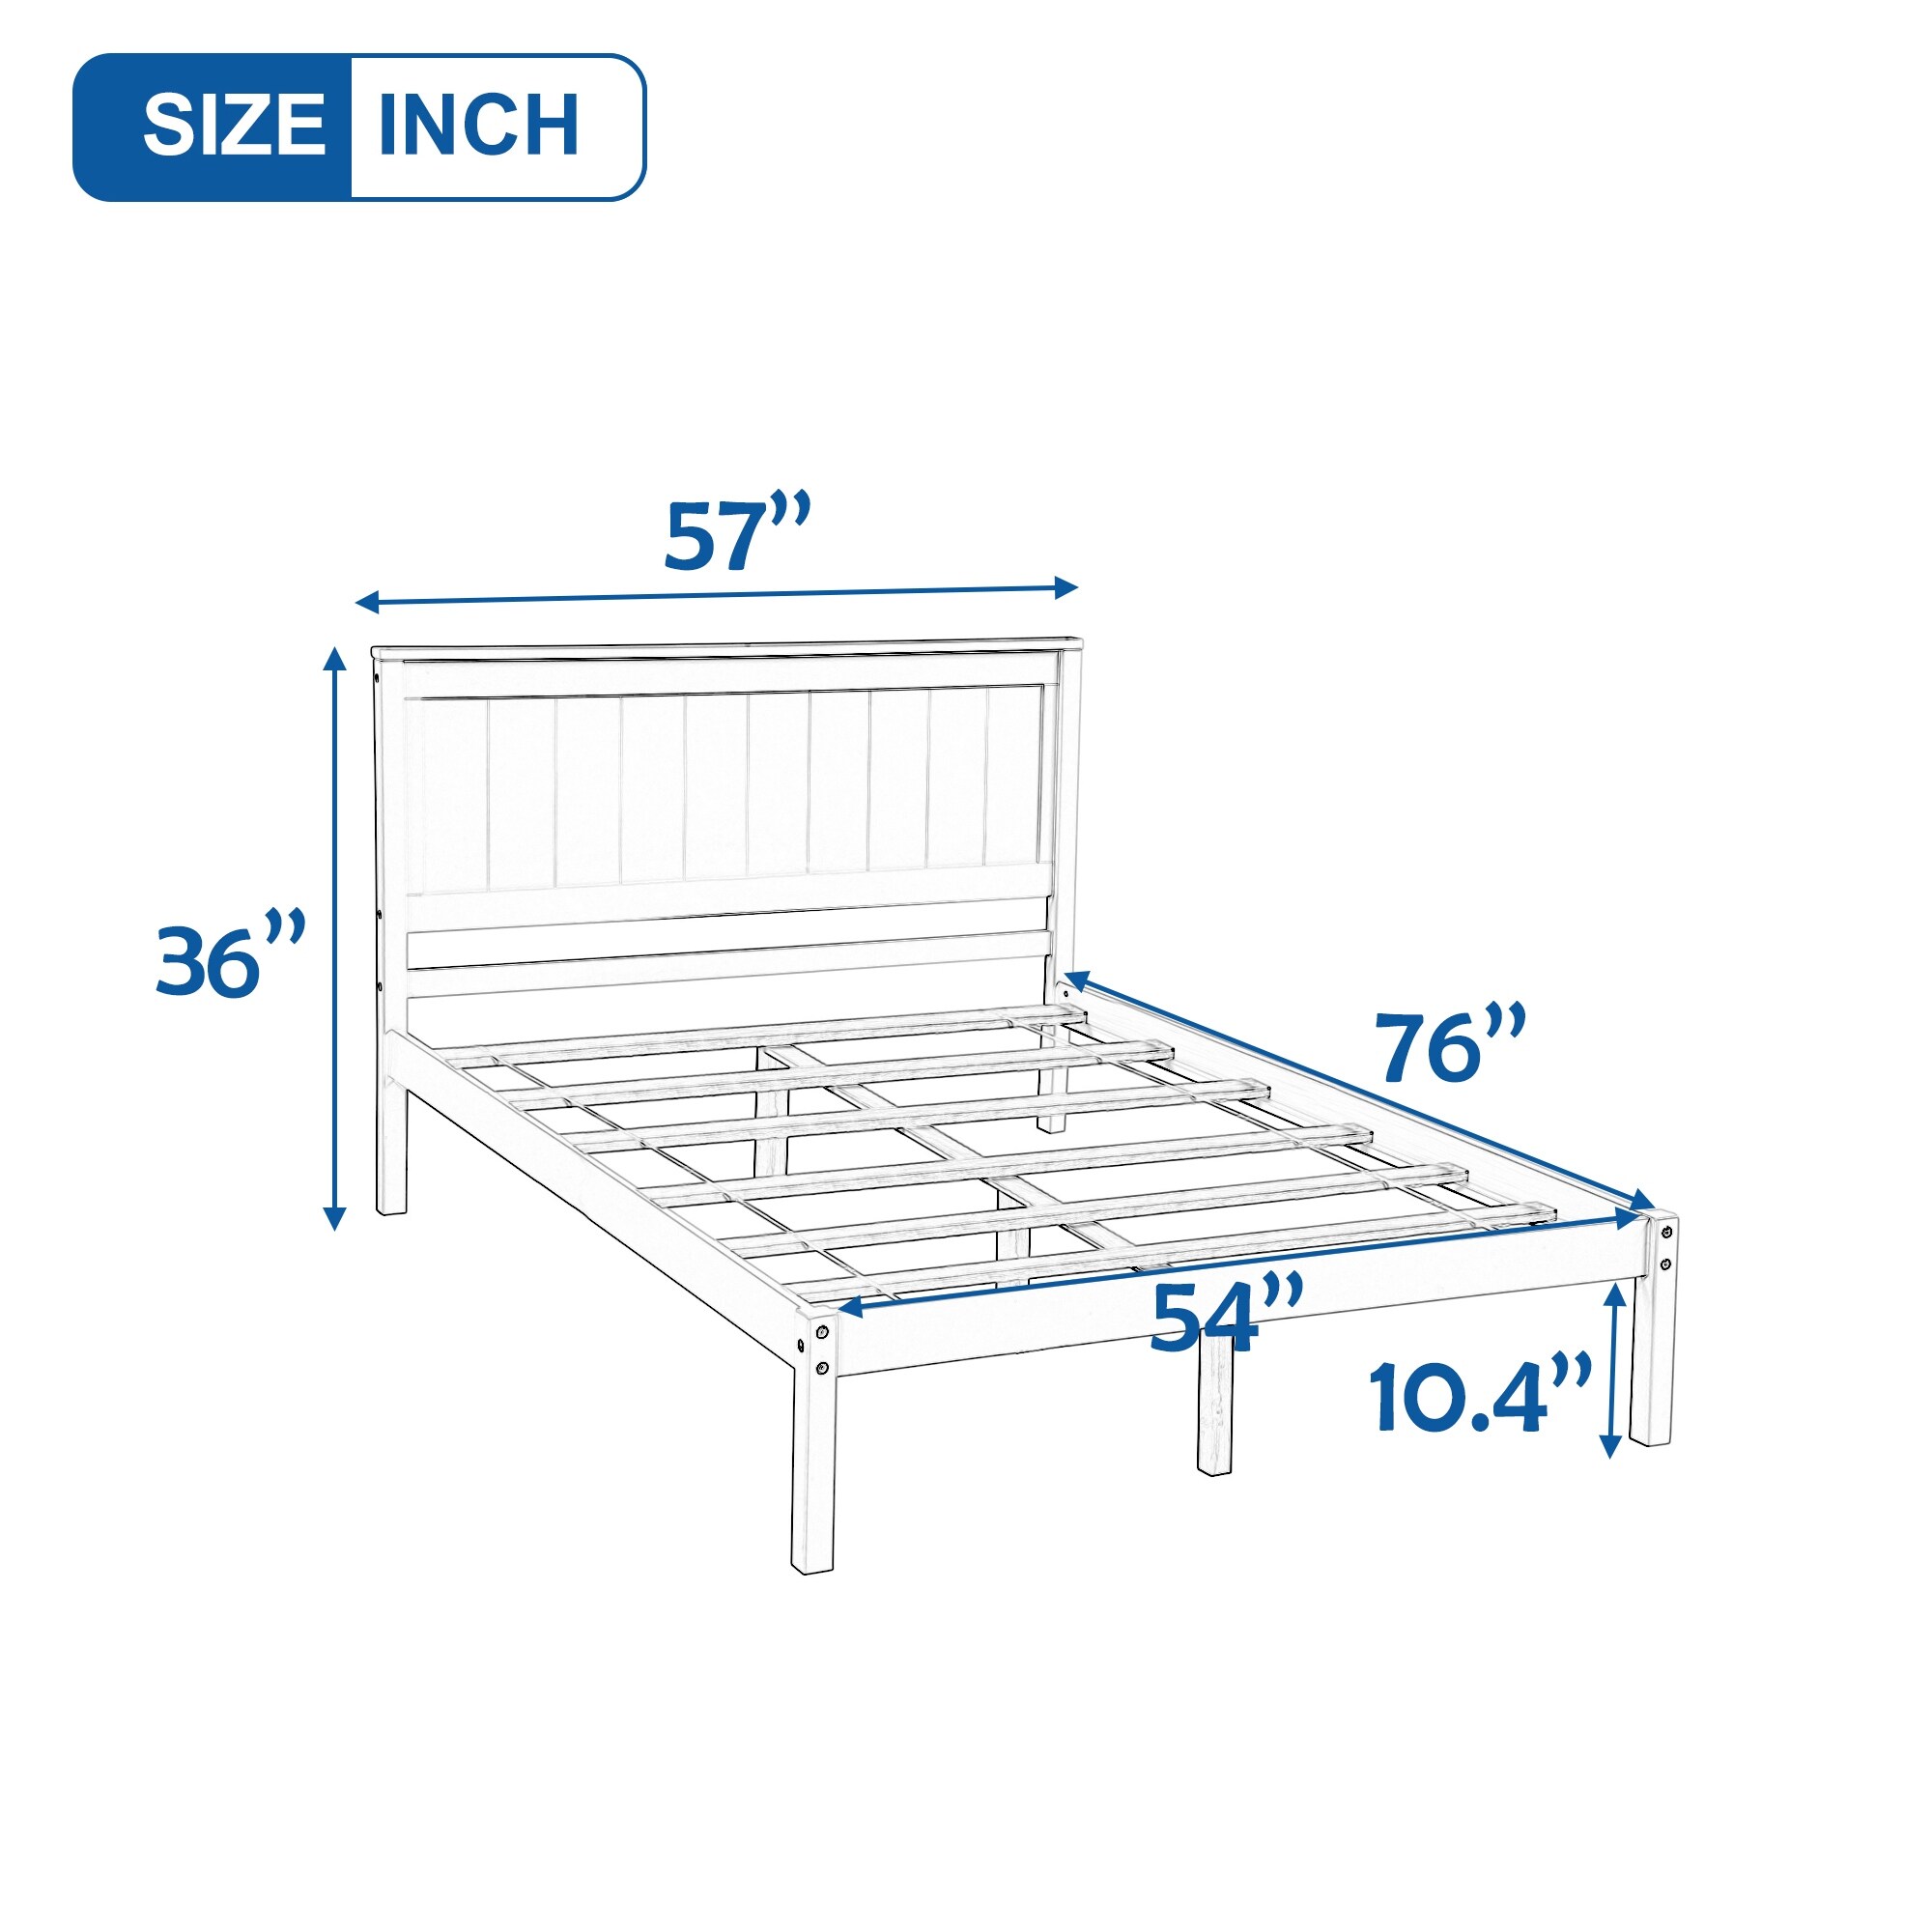 Optimum Durable Full Wood Platform Bed Frame with Headboard&Under-bed Storage, 8 Slats Support, No Box Spring Needed